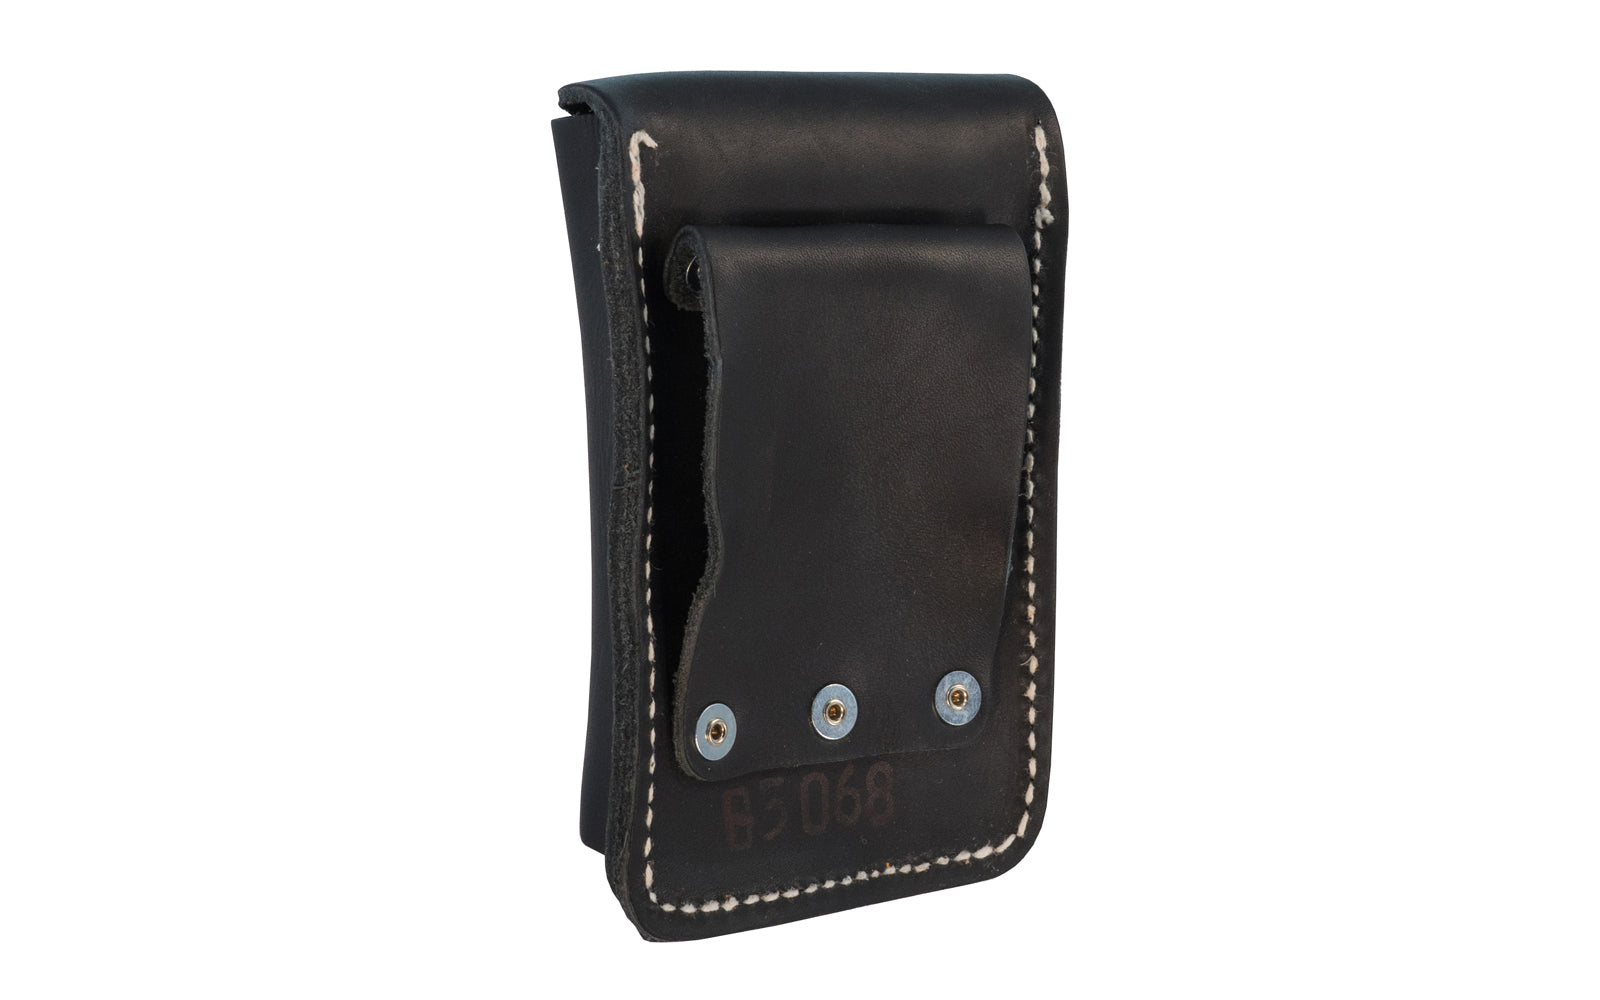 Occidental Leather All-Leather Black color Construction Calculator Holder Case ~ B5068 - Model No. B5068 ~ Fits Construction Master models I, II, III, IV, & other brands. Fits a Galaxy S3 cell phone ~ Up to 3" wide belt - Made in USA ~ Genuine Leather construction holder holster ~ 759244224108 -  Belt - Leather - Black